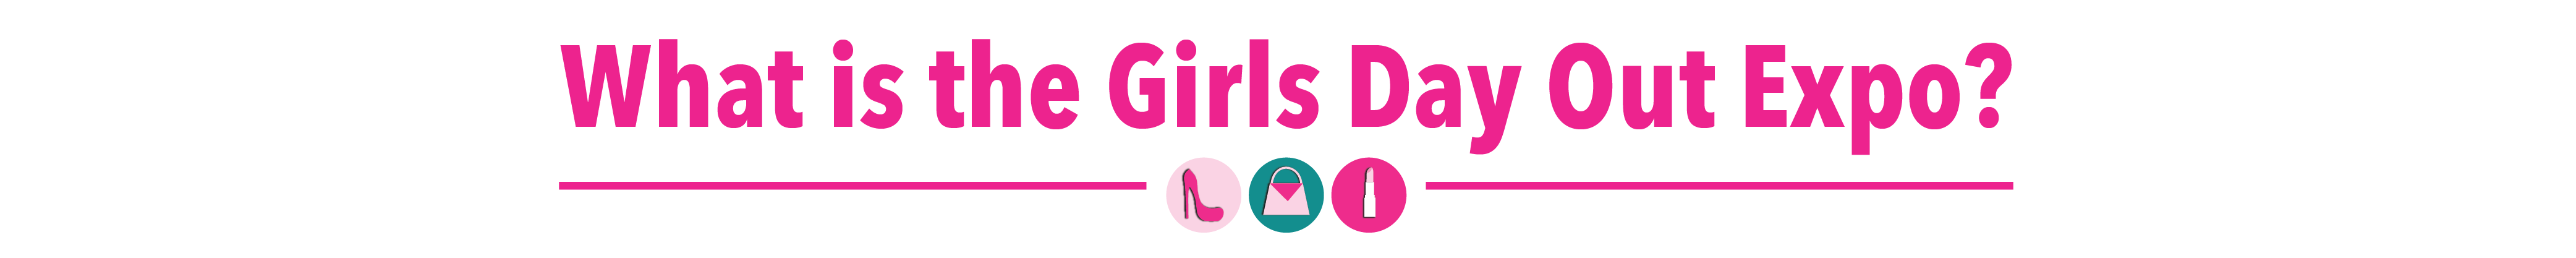 What is Girl's Day Out Expo